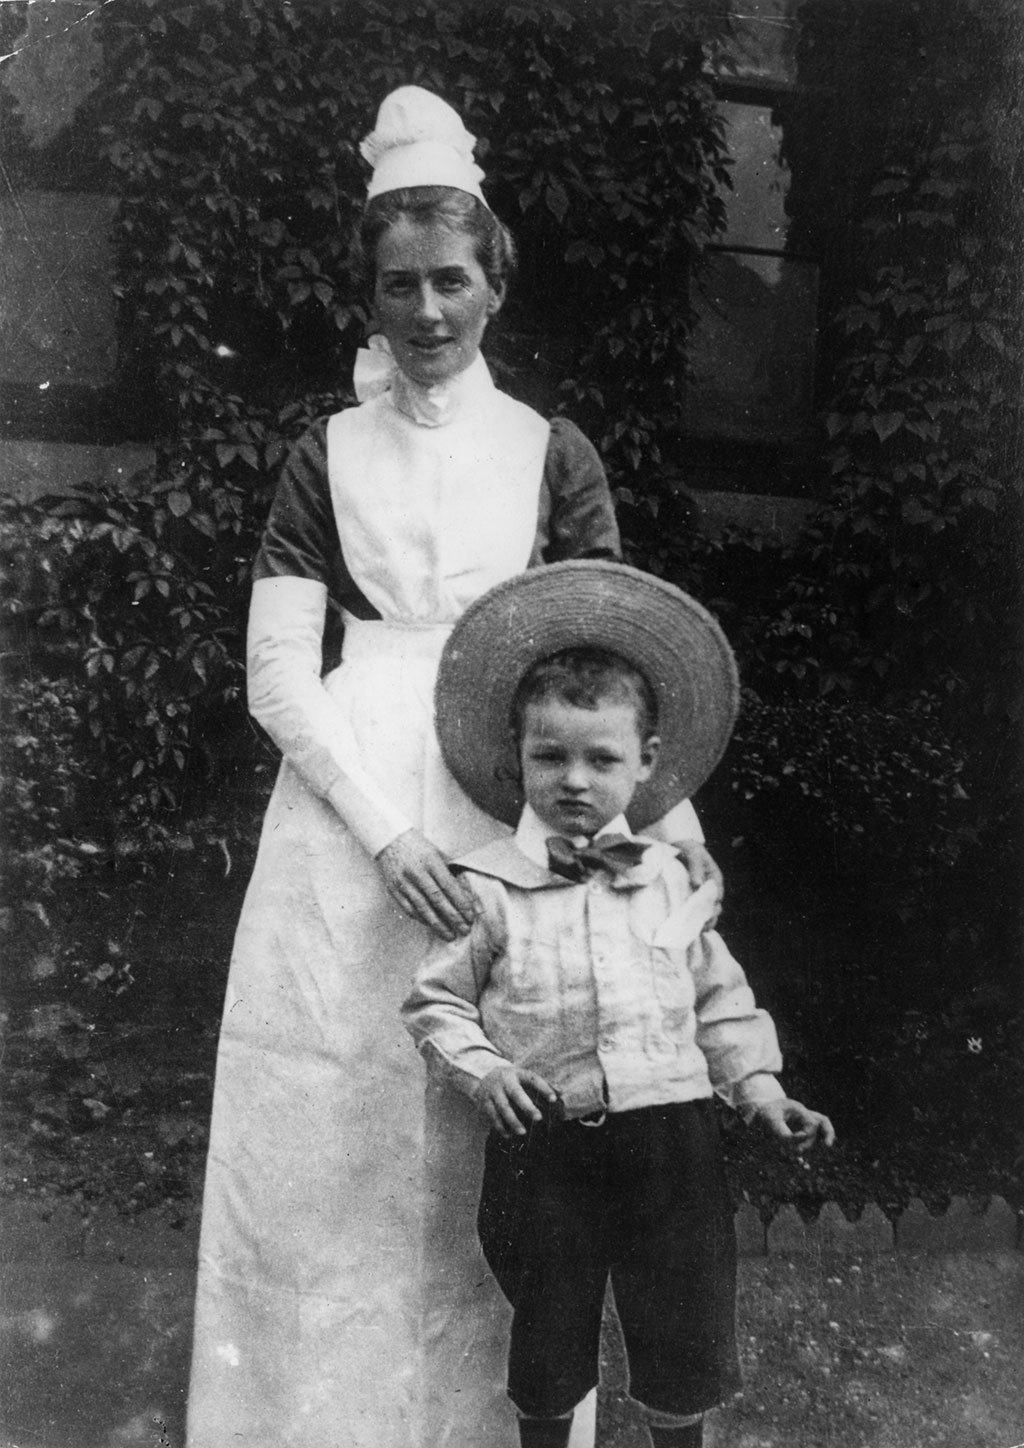 A black and white photograph of Edith Cavell in her nurse's uniform, smiling and standing behind a young child wearing a large straw hat